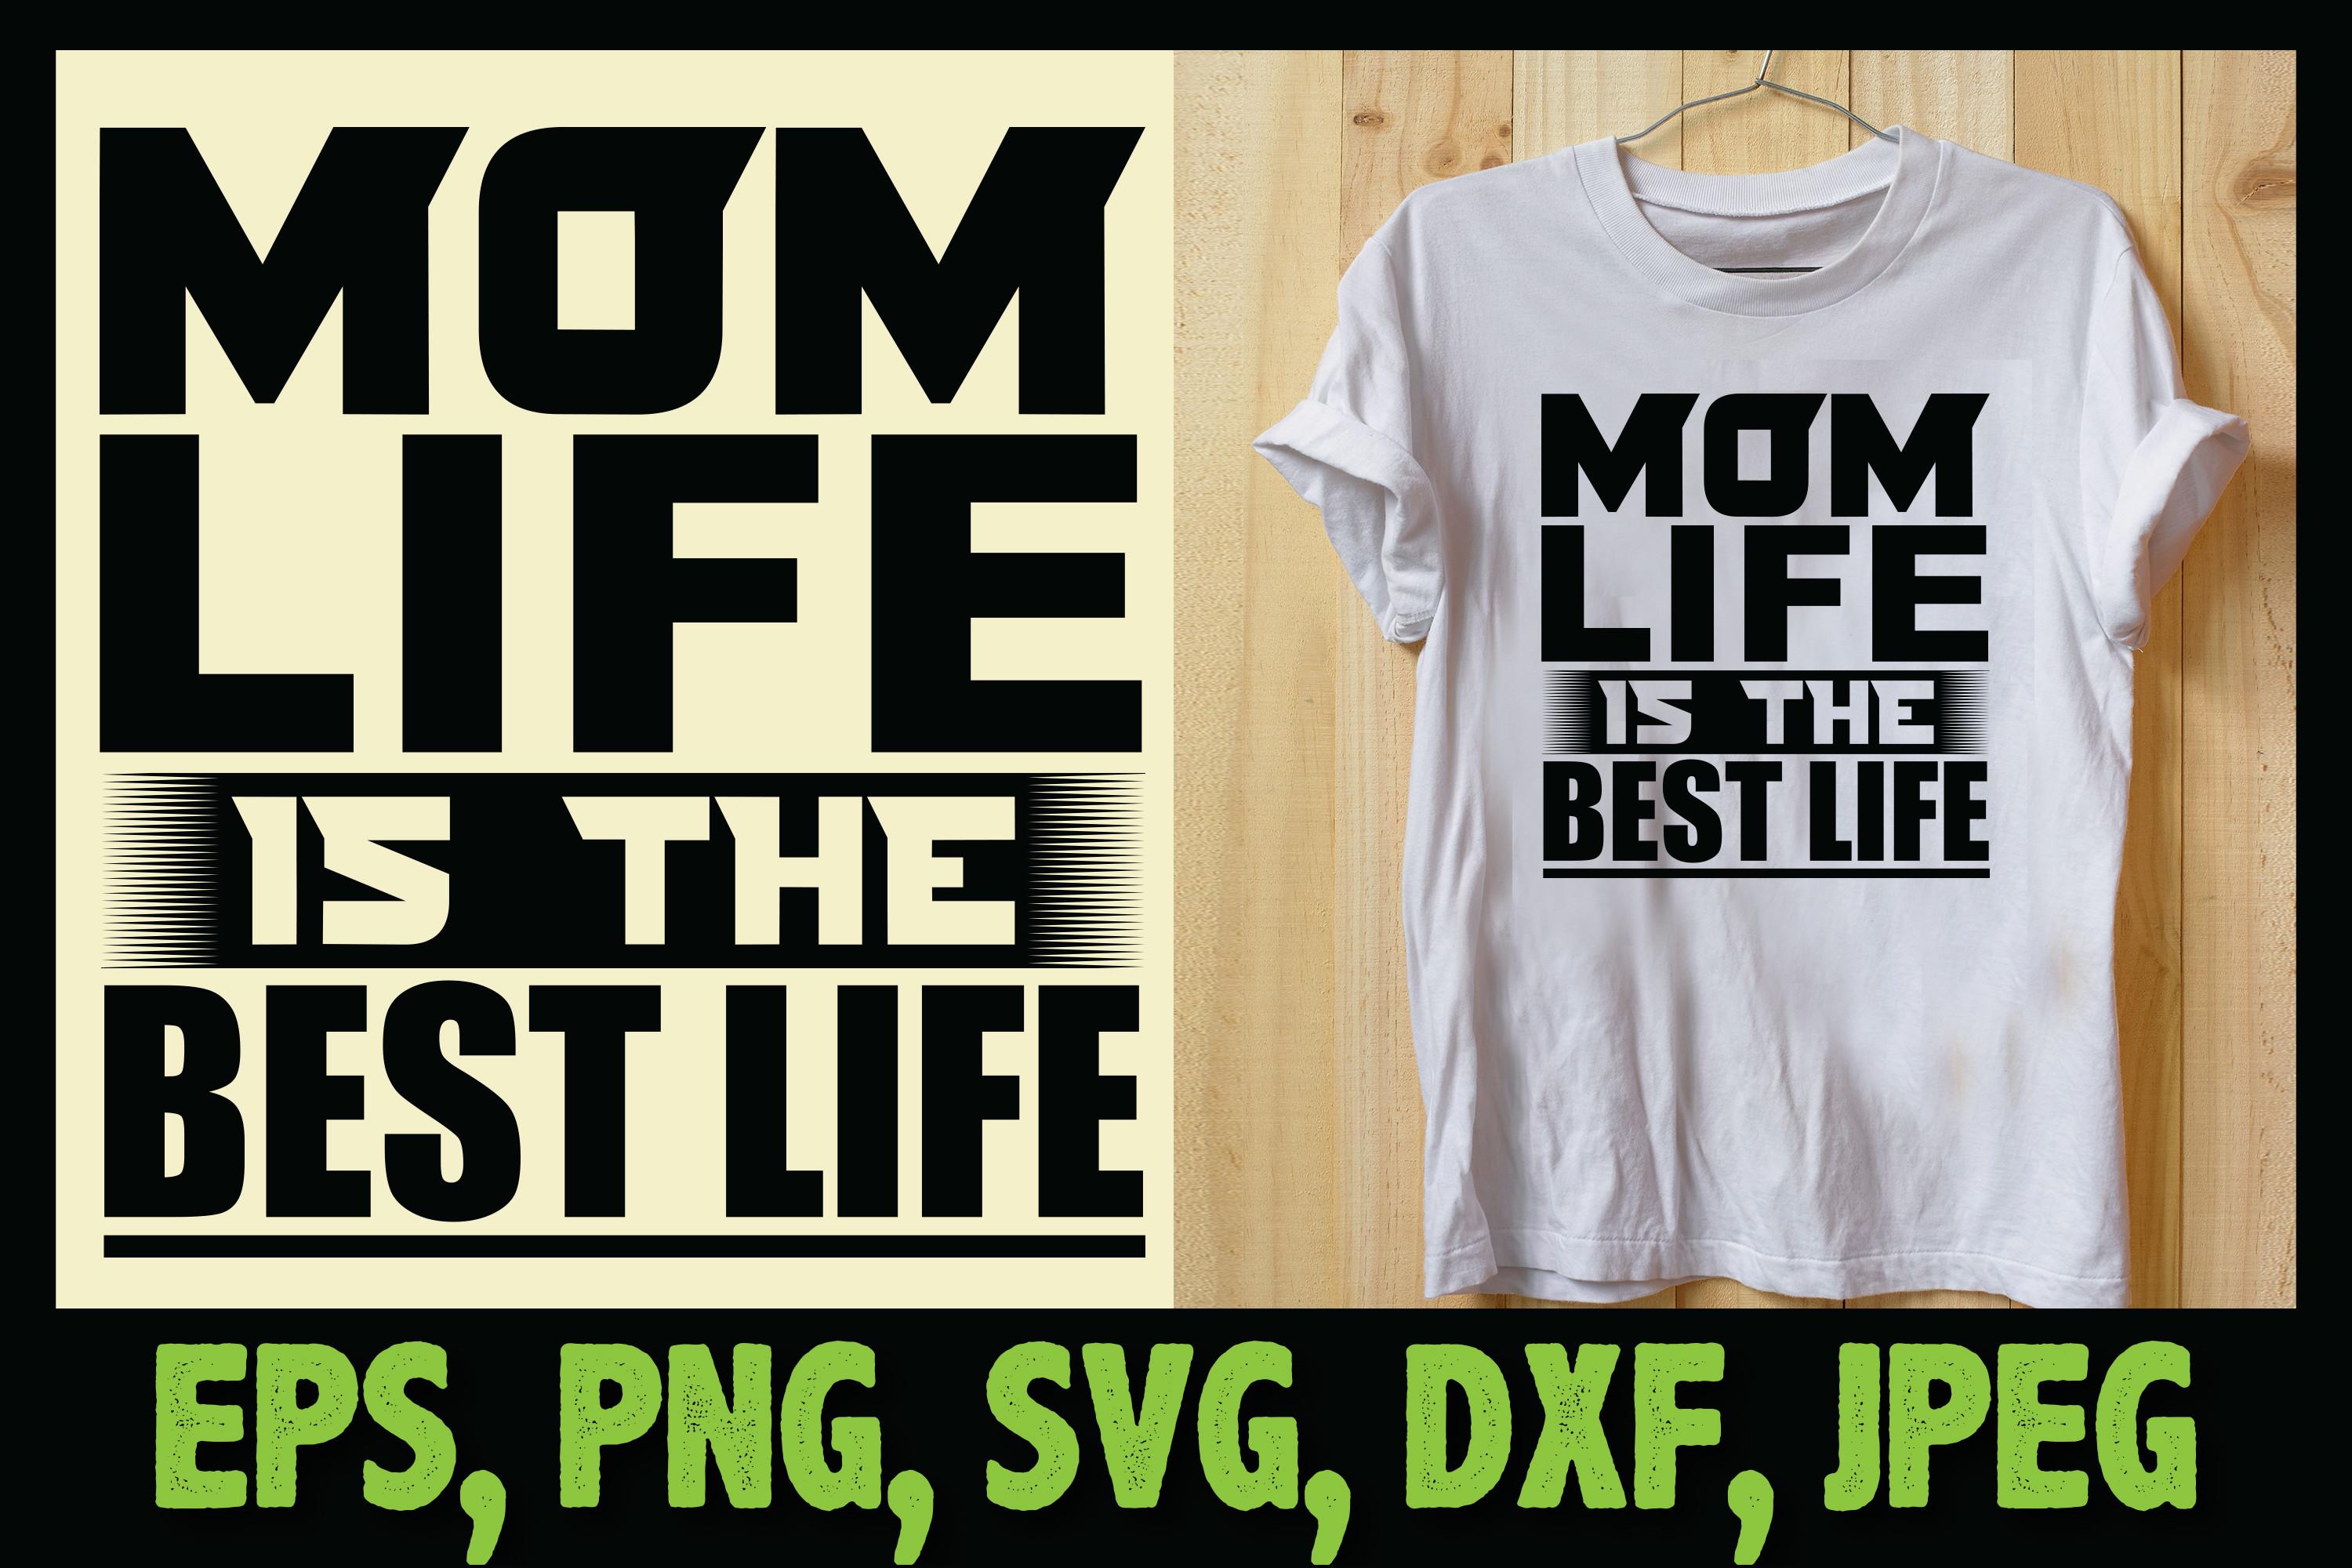 Mom Life is the Best Life T-shirt Design